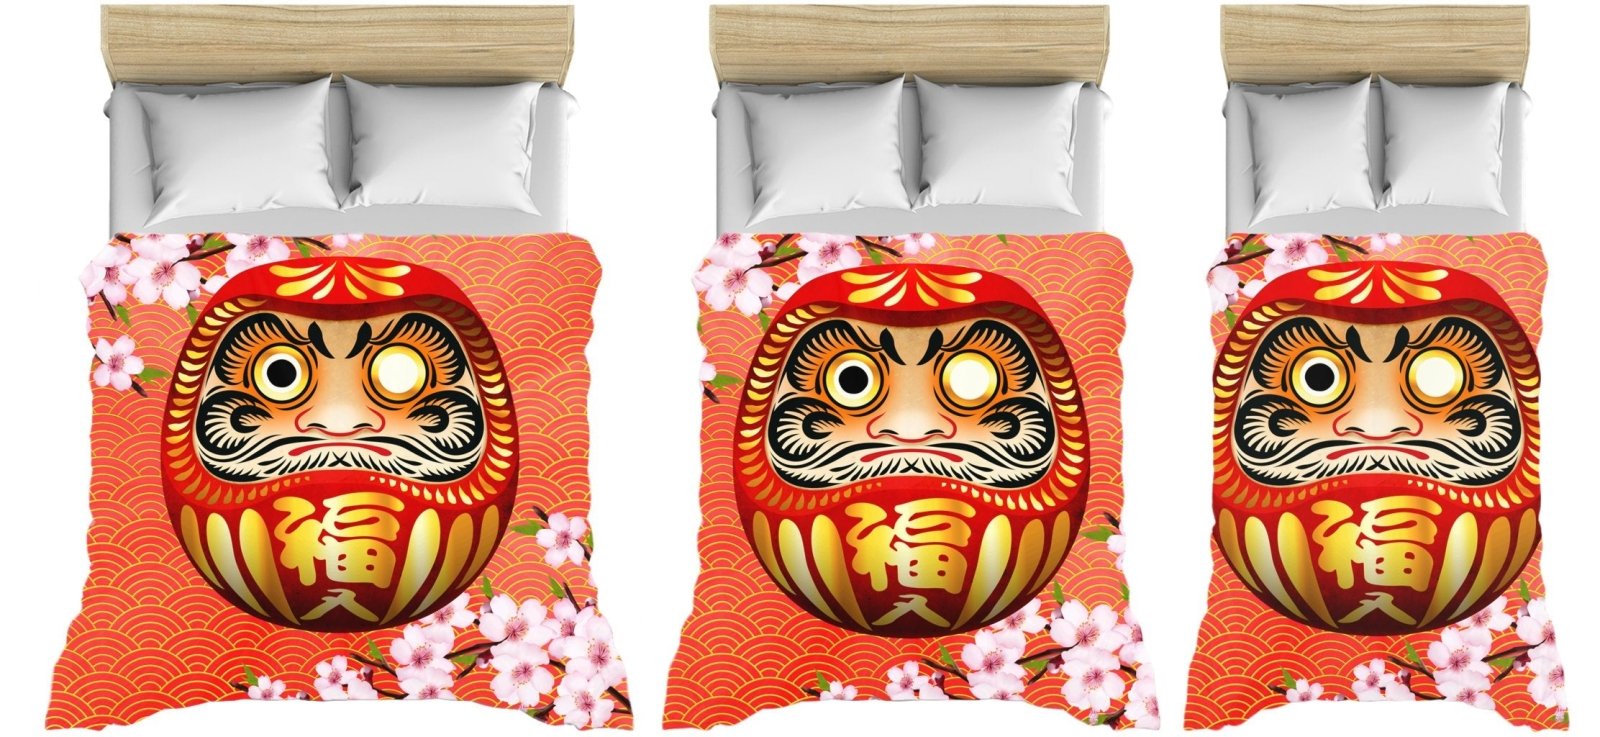 Daruma Bedding Set, Comforter and Duvet, Indie Bed Cover and Bedroom Decor, King, Queen and Twin Size - Red - Abysm Internal